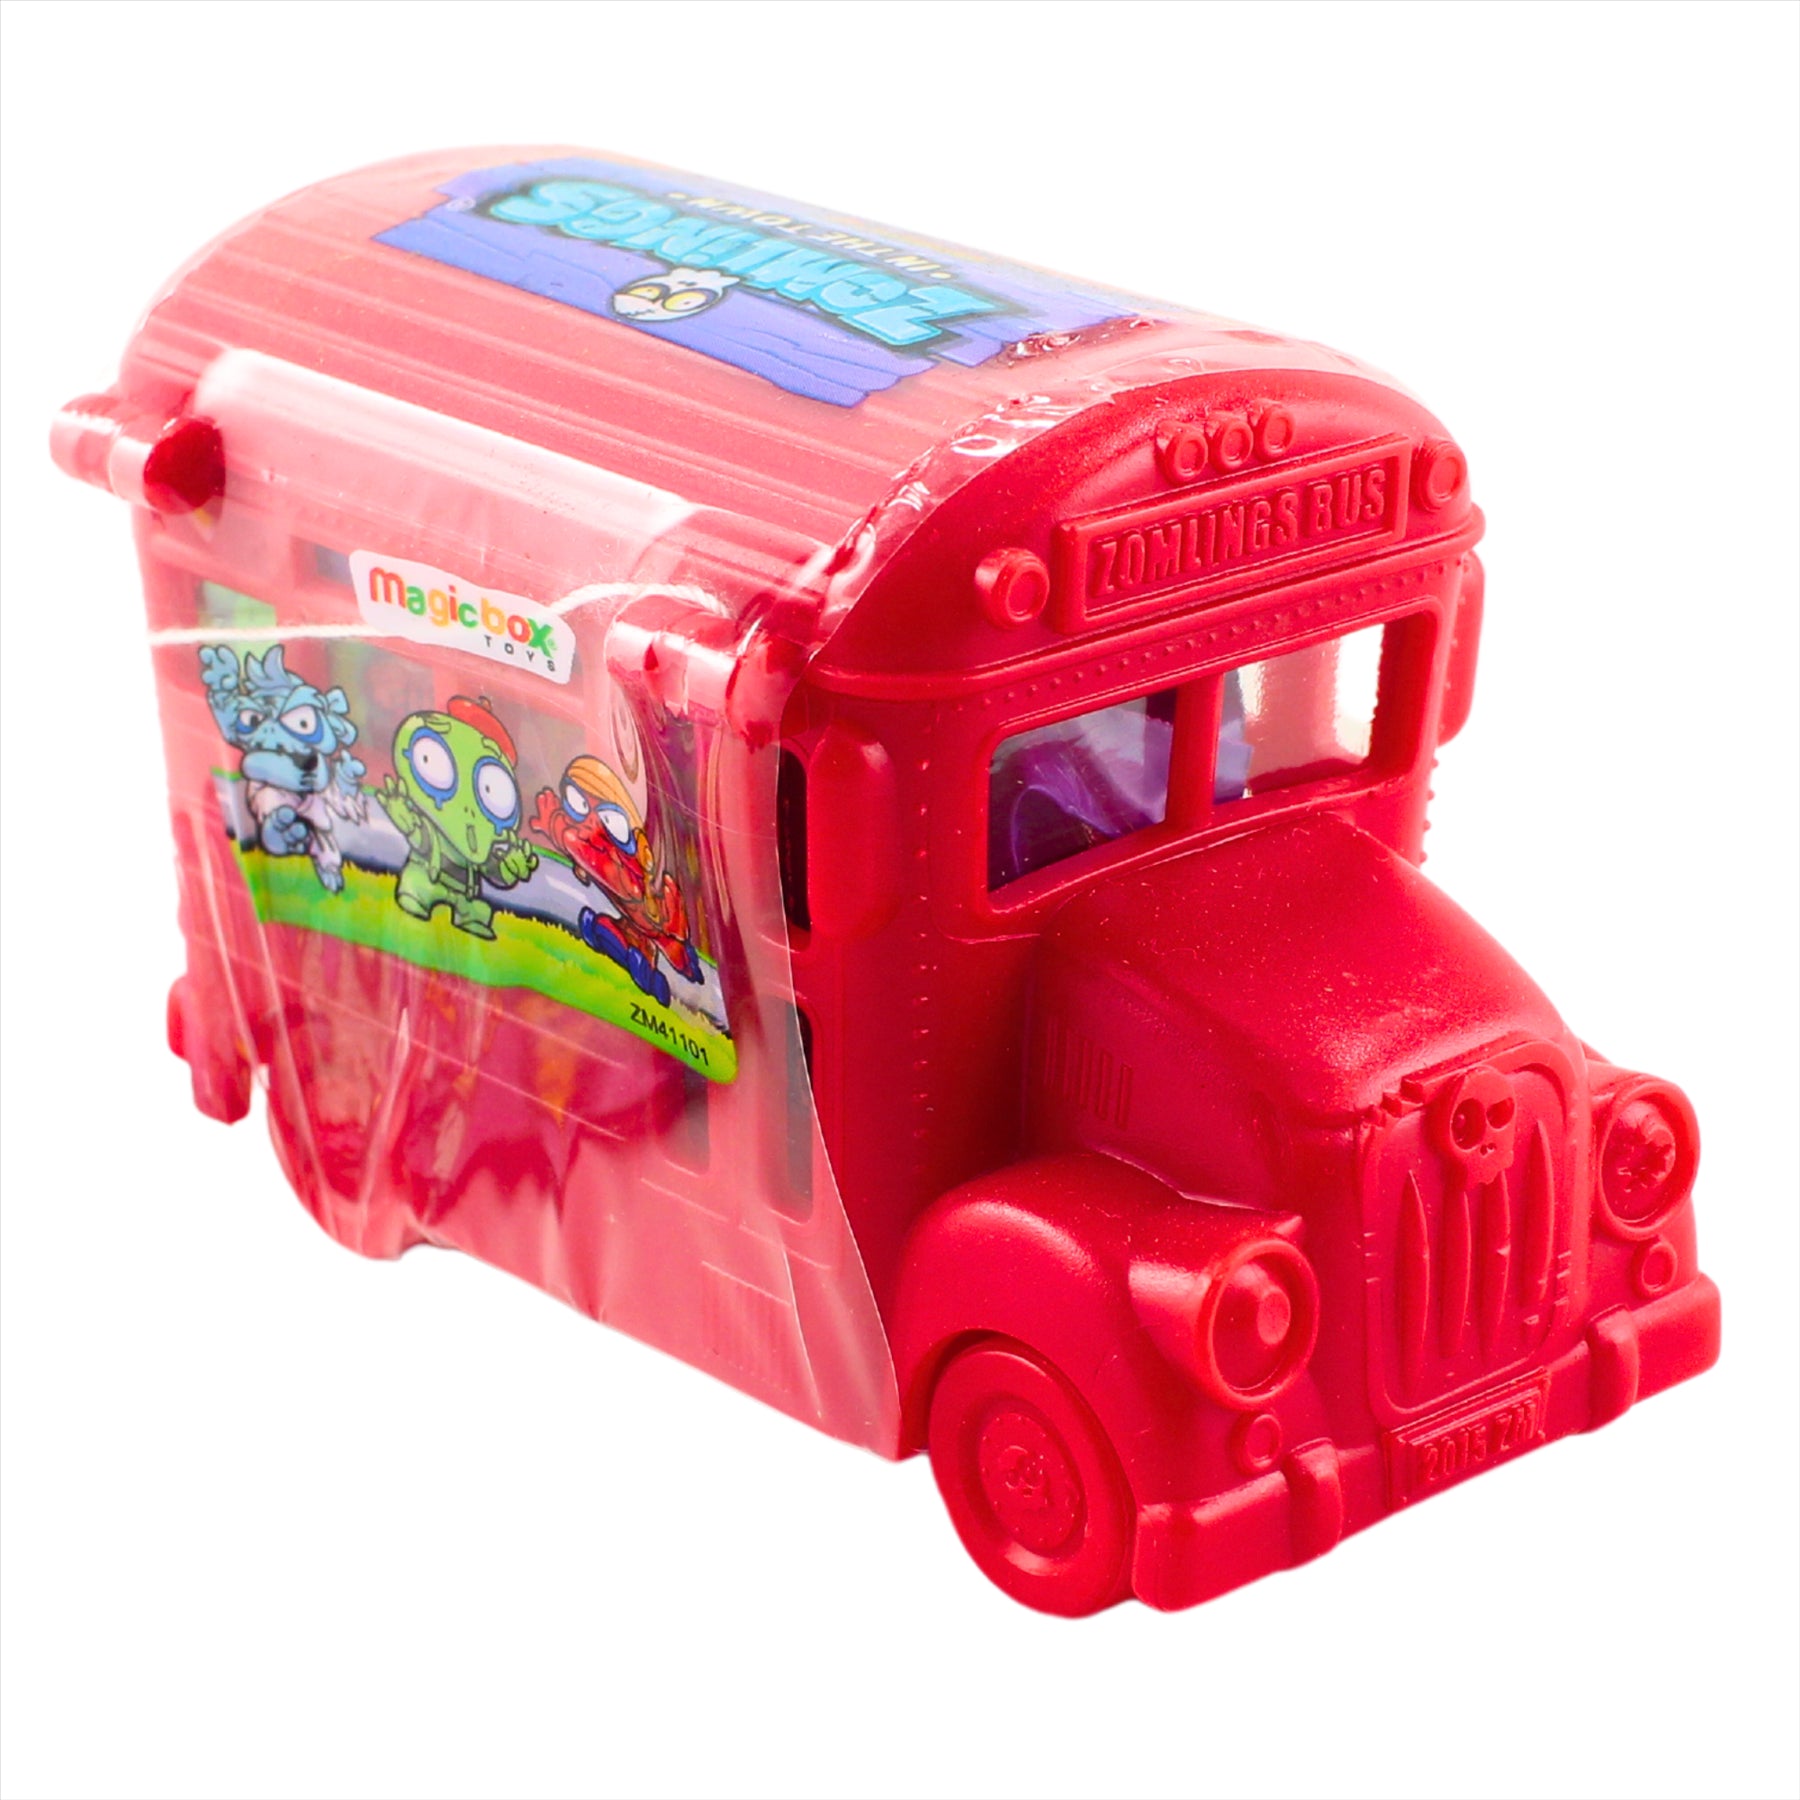 Zomlings in The Town - Series 4 Zom-Mobiles - Red, Blue, & Yellow Buses - 2 Zomlings per Bus - Pack of 6 - Toptoys2u